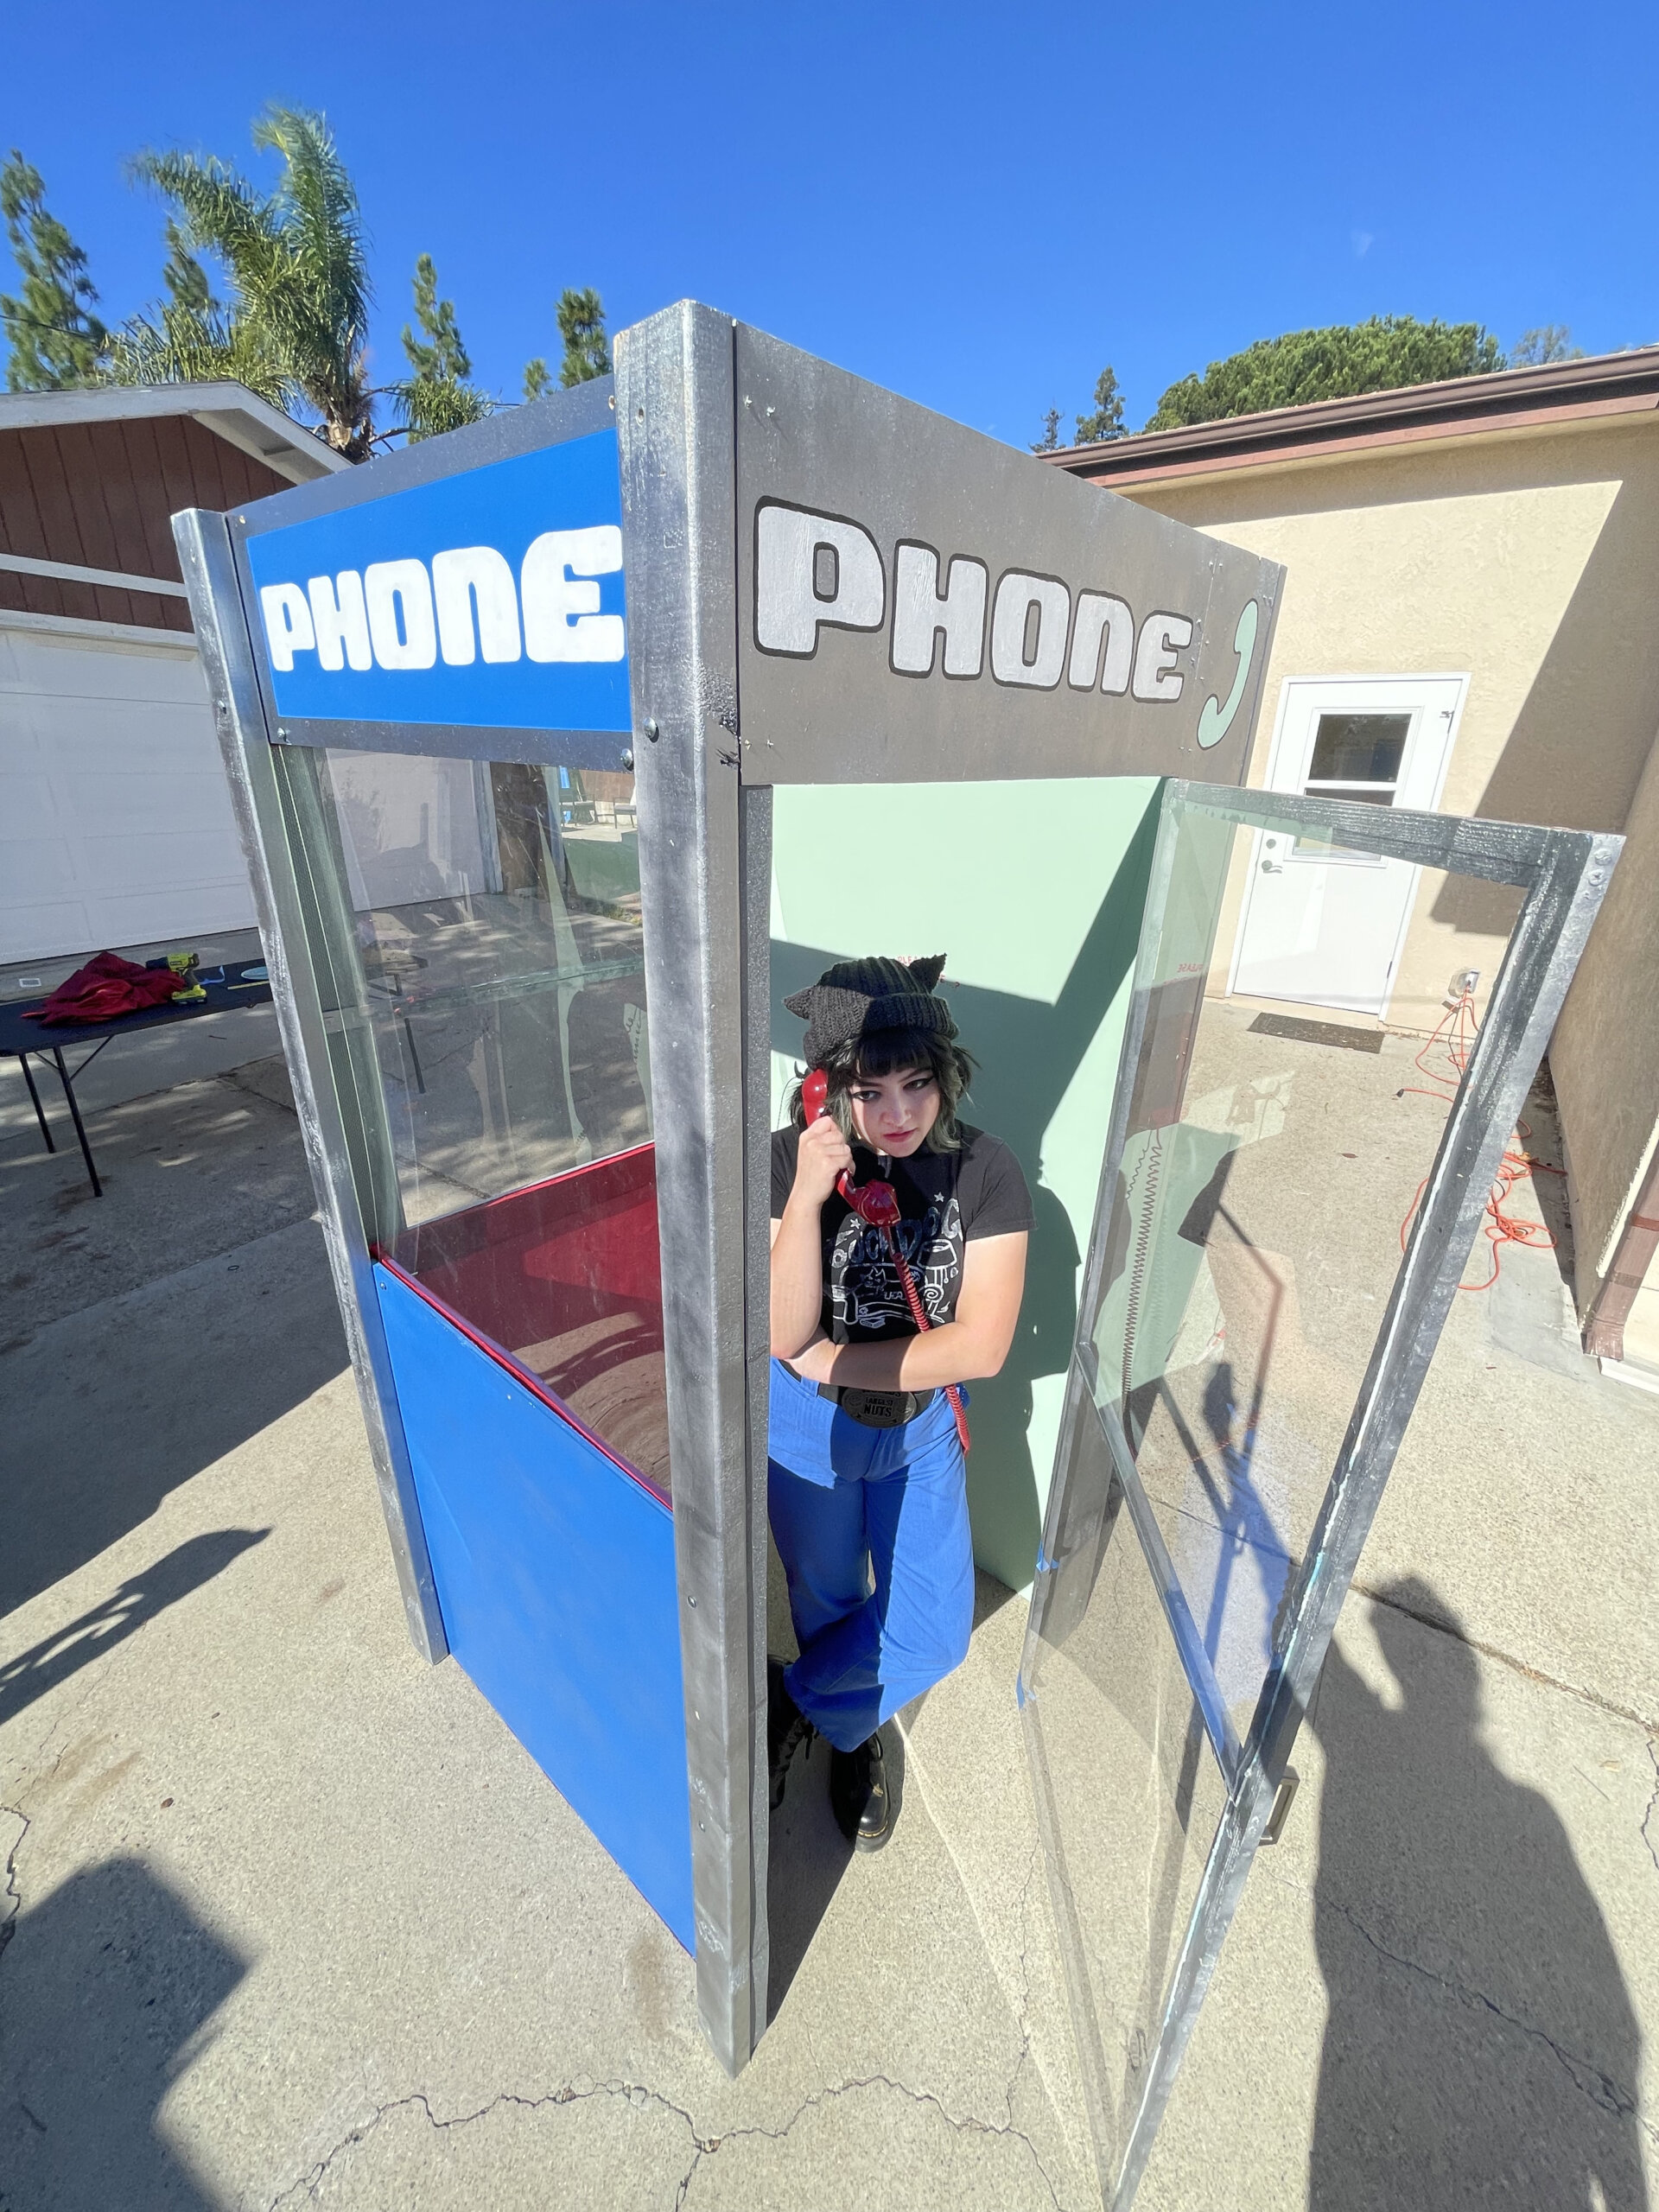 A band member is inside the phone booth she built for concerts